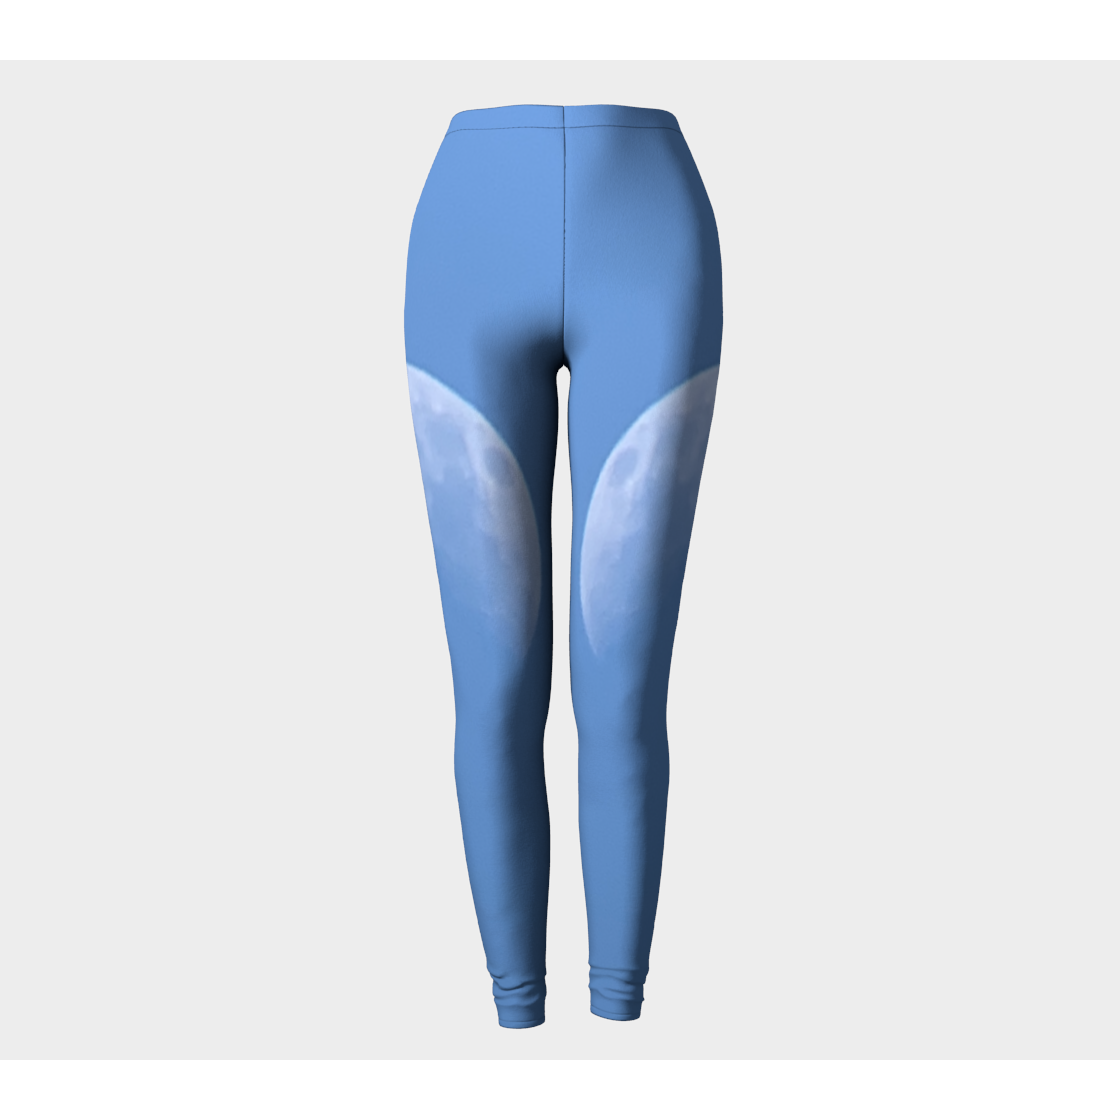 Leggings For Women with: Half Moon Design, Front